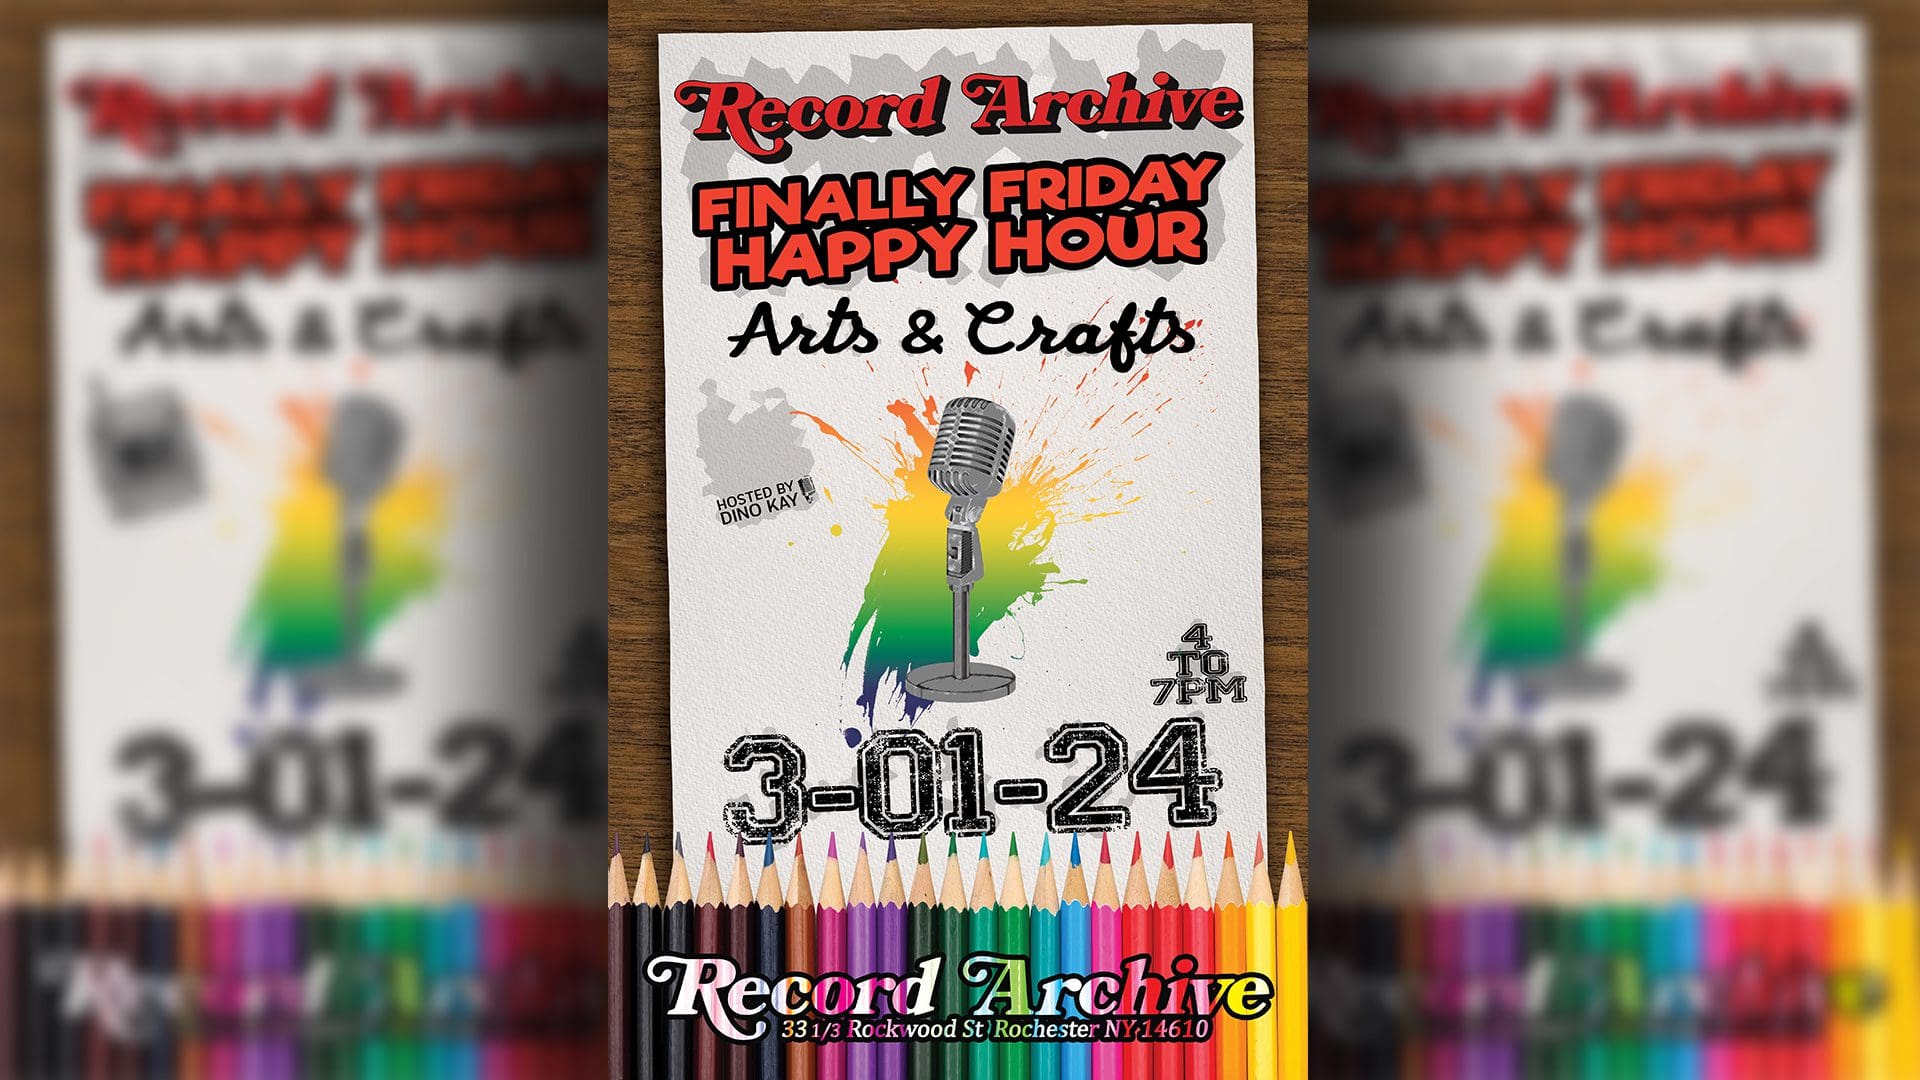 Record Archive Finally Friday Happy Hour. Arts & Crafts. 3-01-24. 4-7pm. Record Archive 33 1/3 Rockwood St Rochester NY 14610